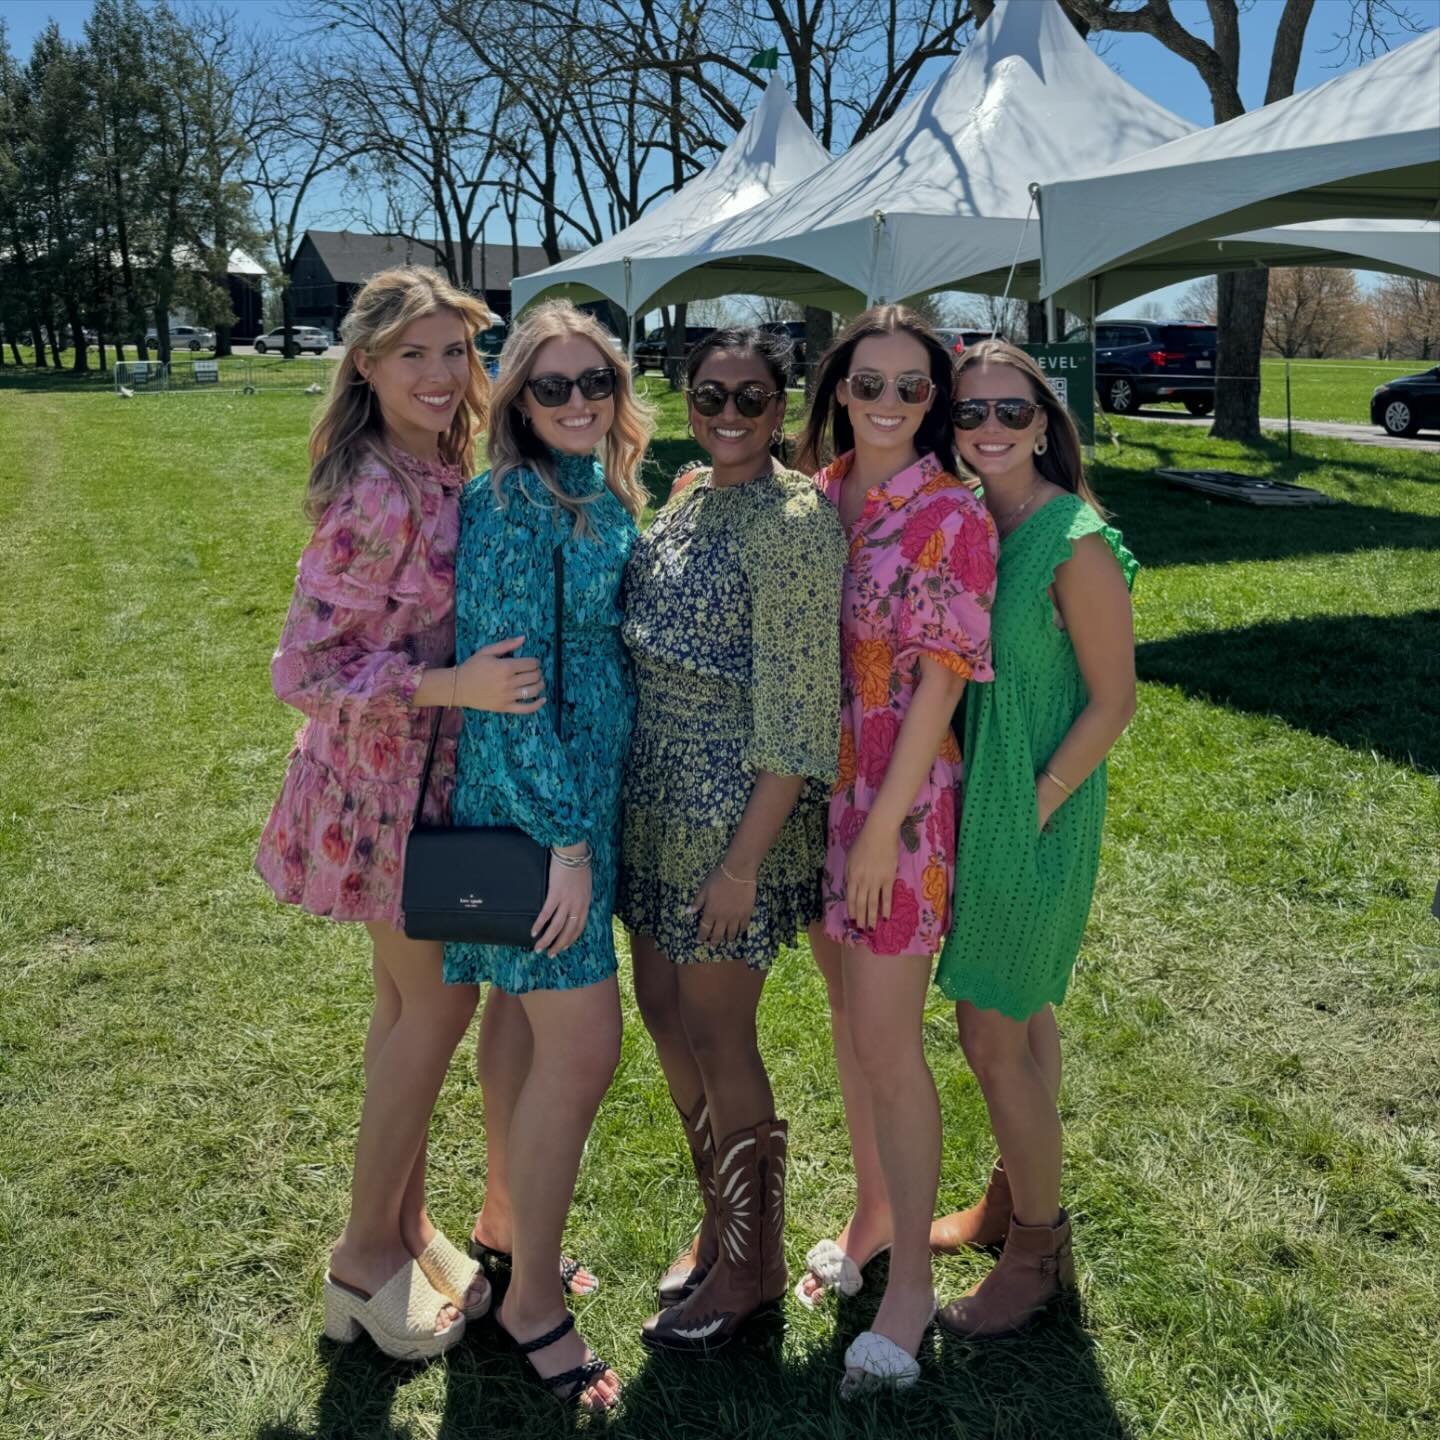 Keeneland with our classmates never disappoints! Thank you again to Pacific Dental Services!! 🦷💙 #springmeet 🐎